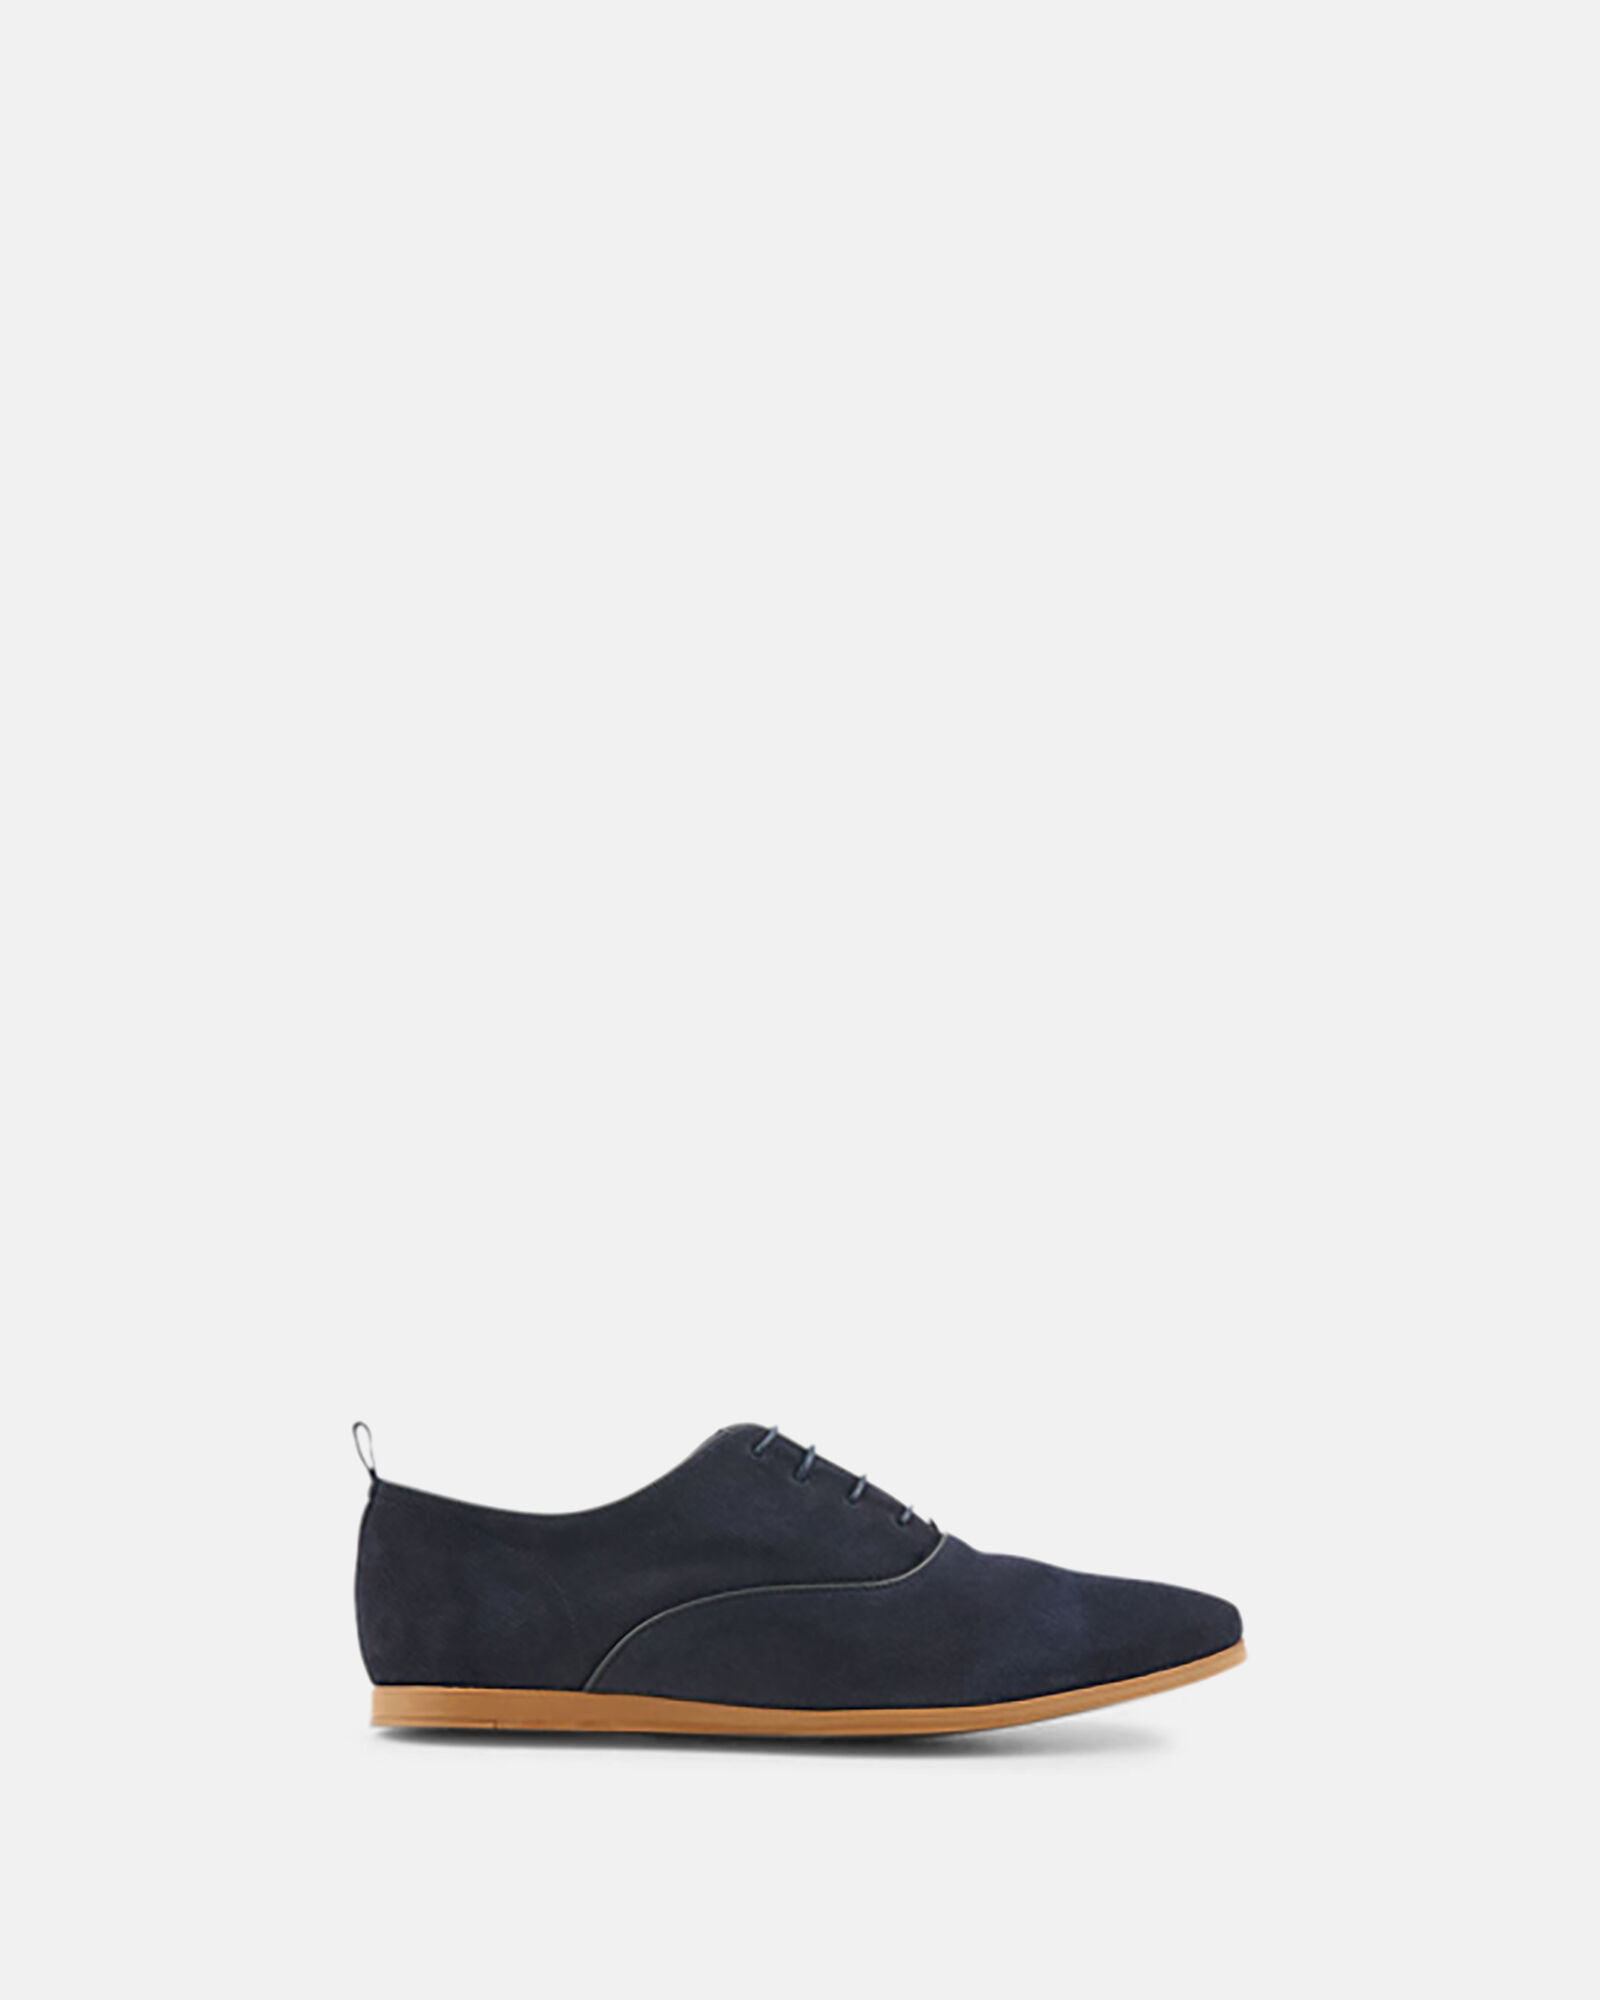 OXFORD SHOE - MESSON NAVY BLUE - Oxford shoes - Minelli